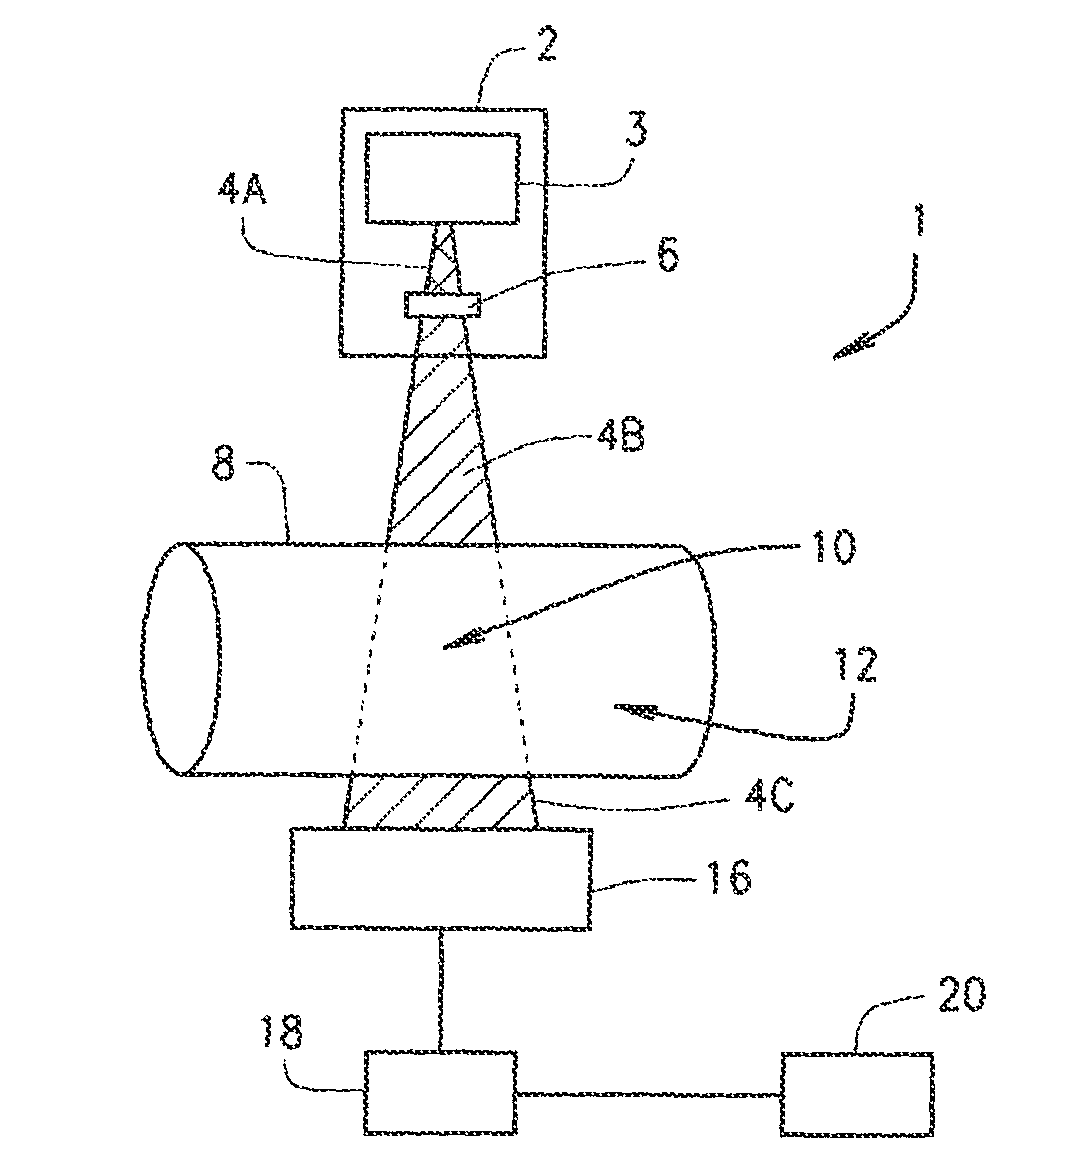 Method and apparatus for measuring enrichment of UF6